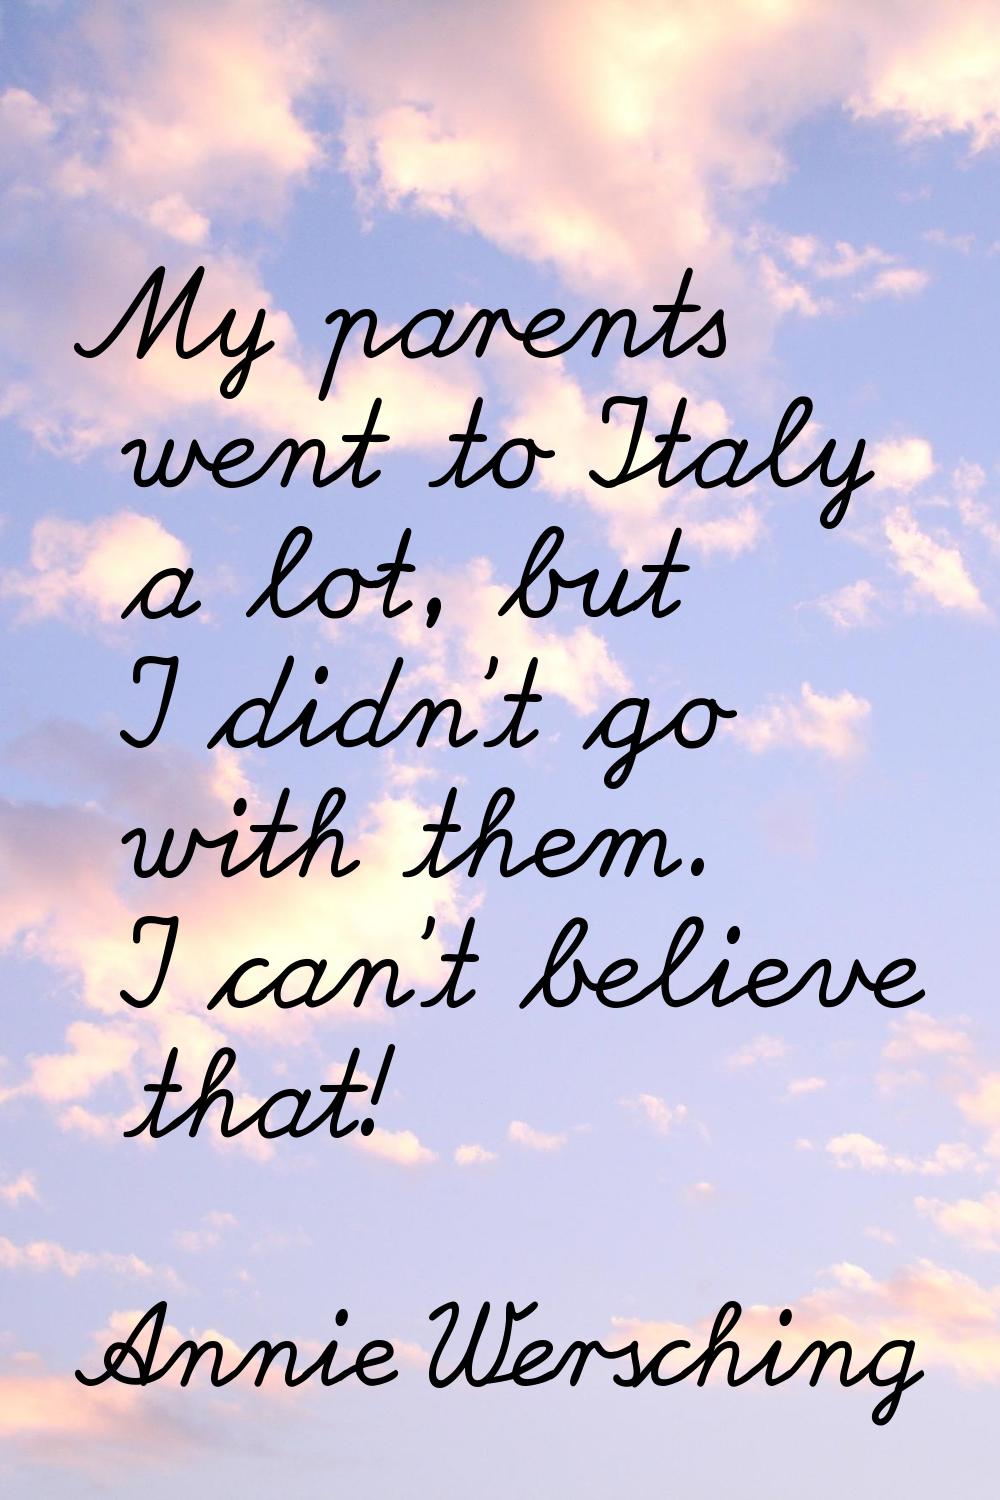 My parents went to Italy a lot, but I didn't go with them. I can't believe that!